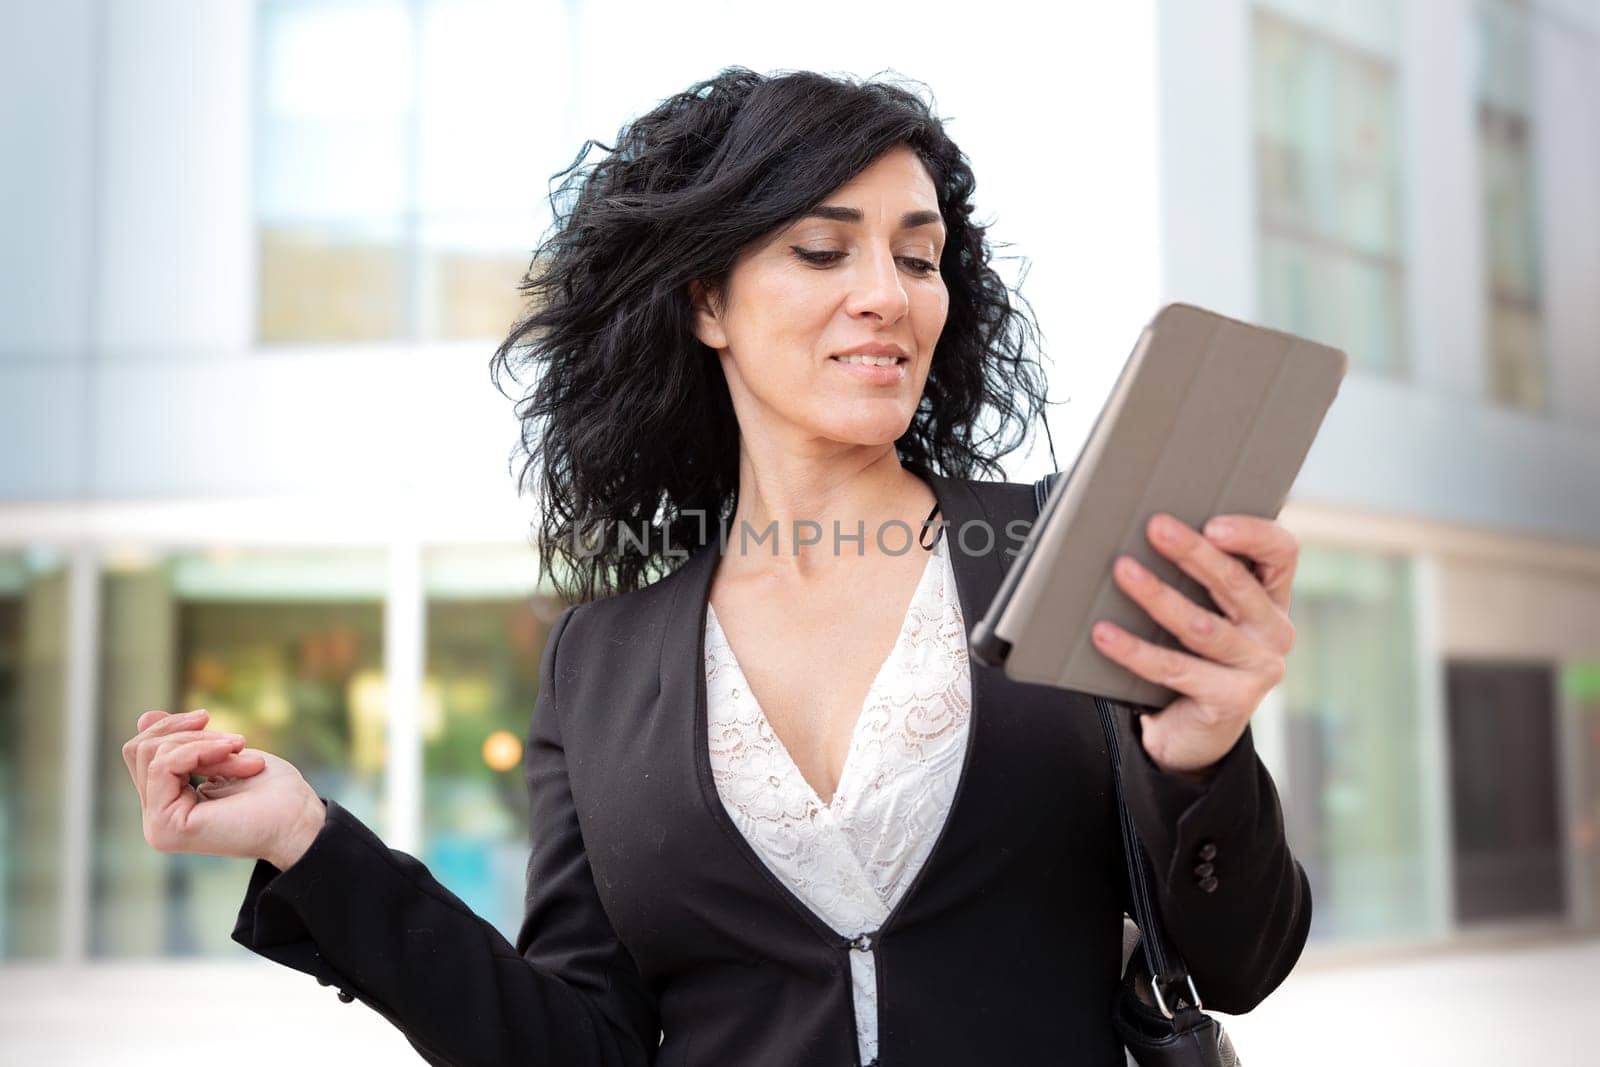 Portrait of a smiling middle-aged business woman with digital tablet in smiling hands.